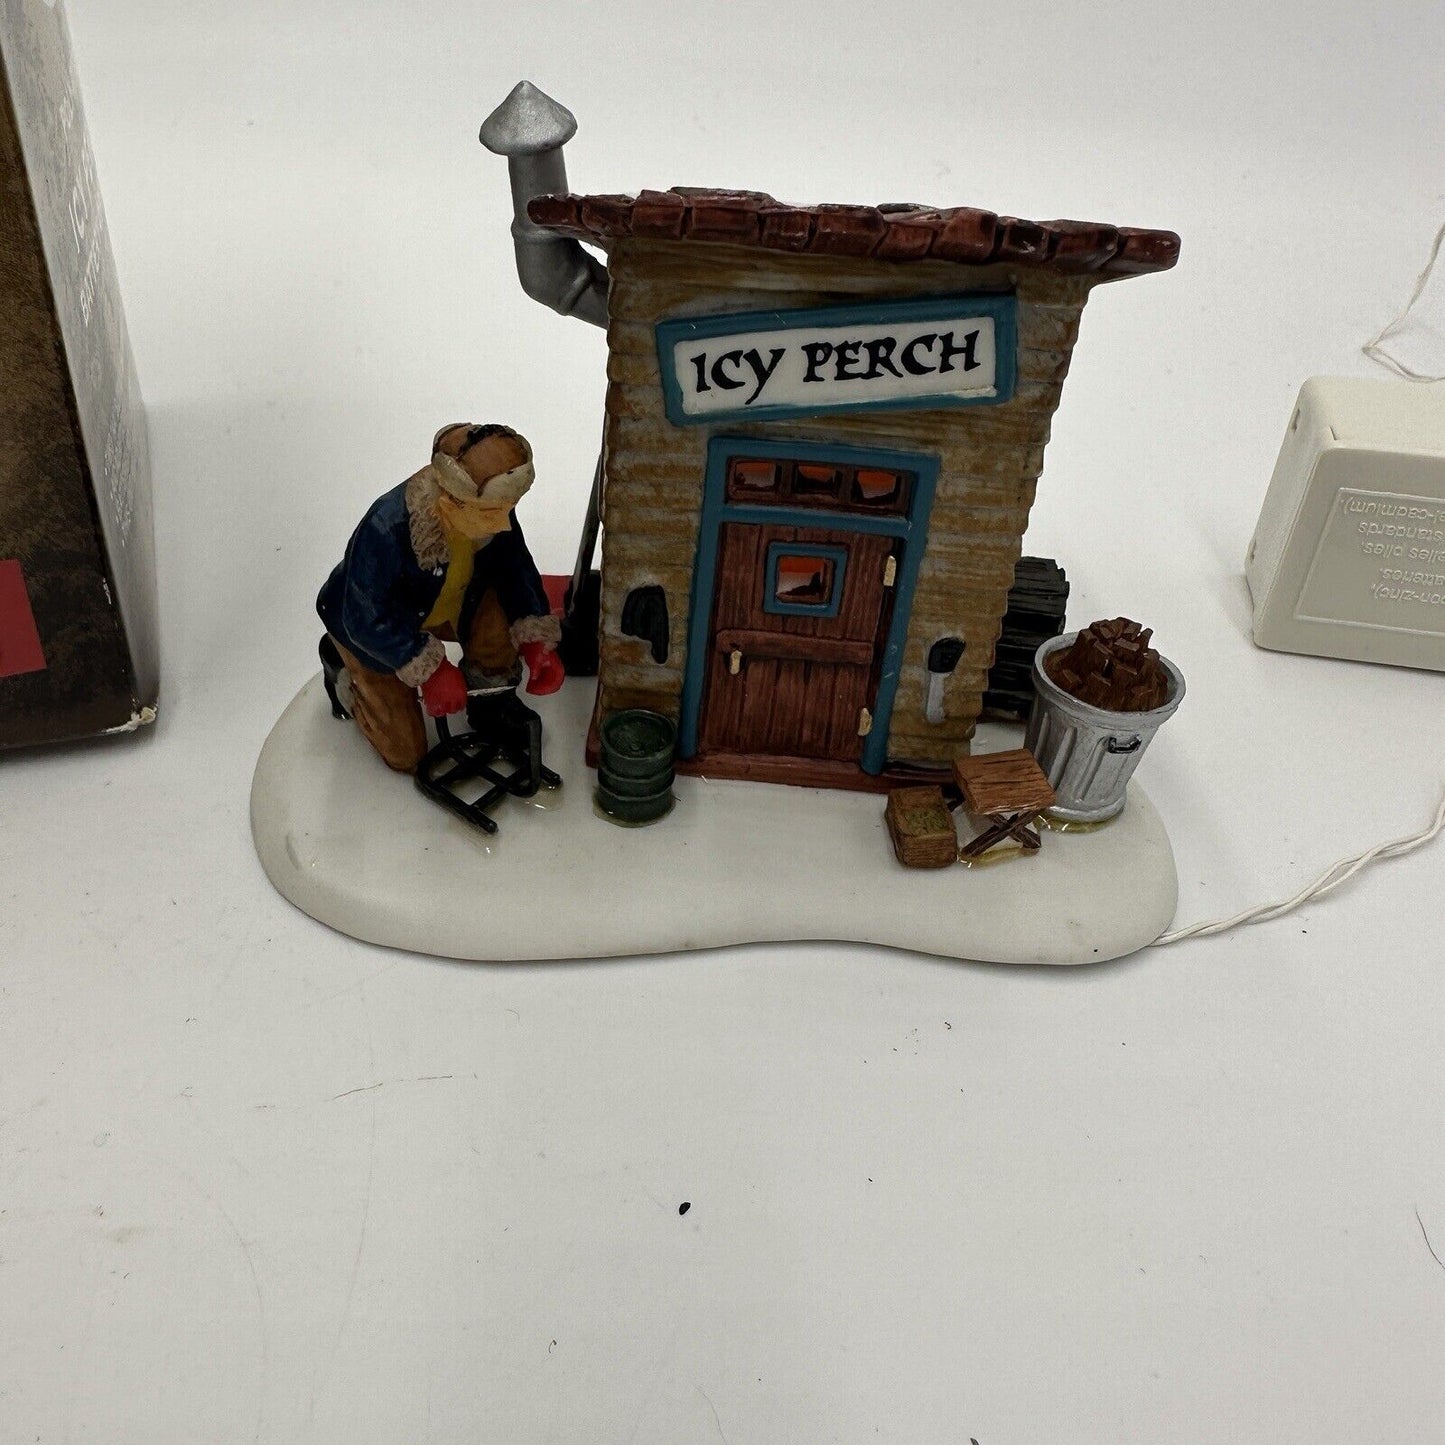 Lemax Village Collection Icy Perch Lights Up Boxed Christmas Ornaments Vintage